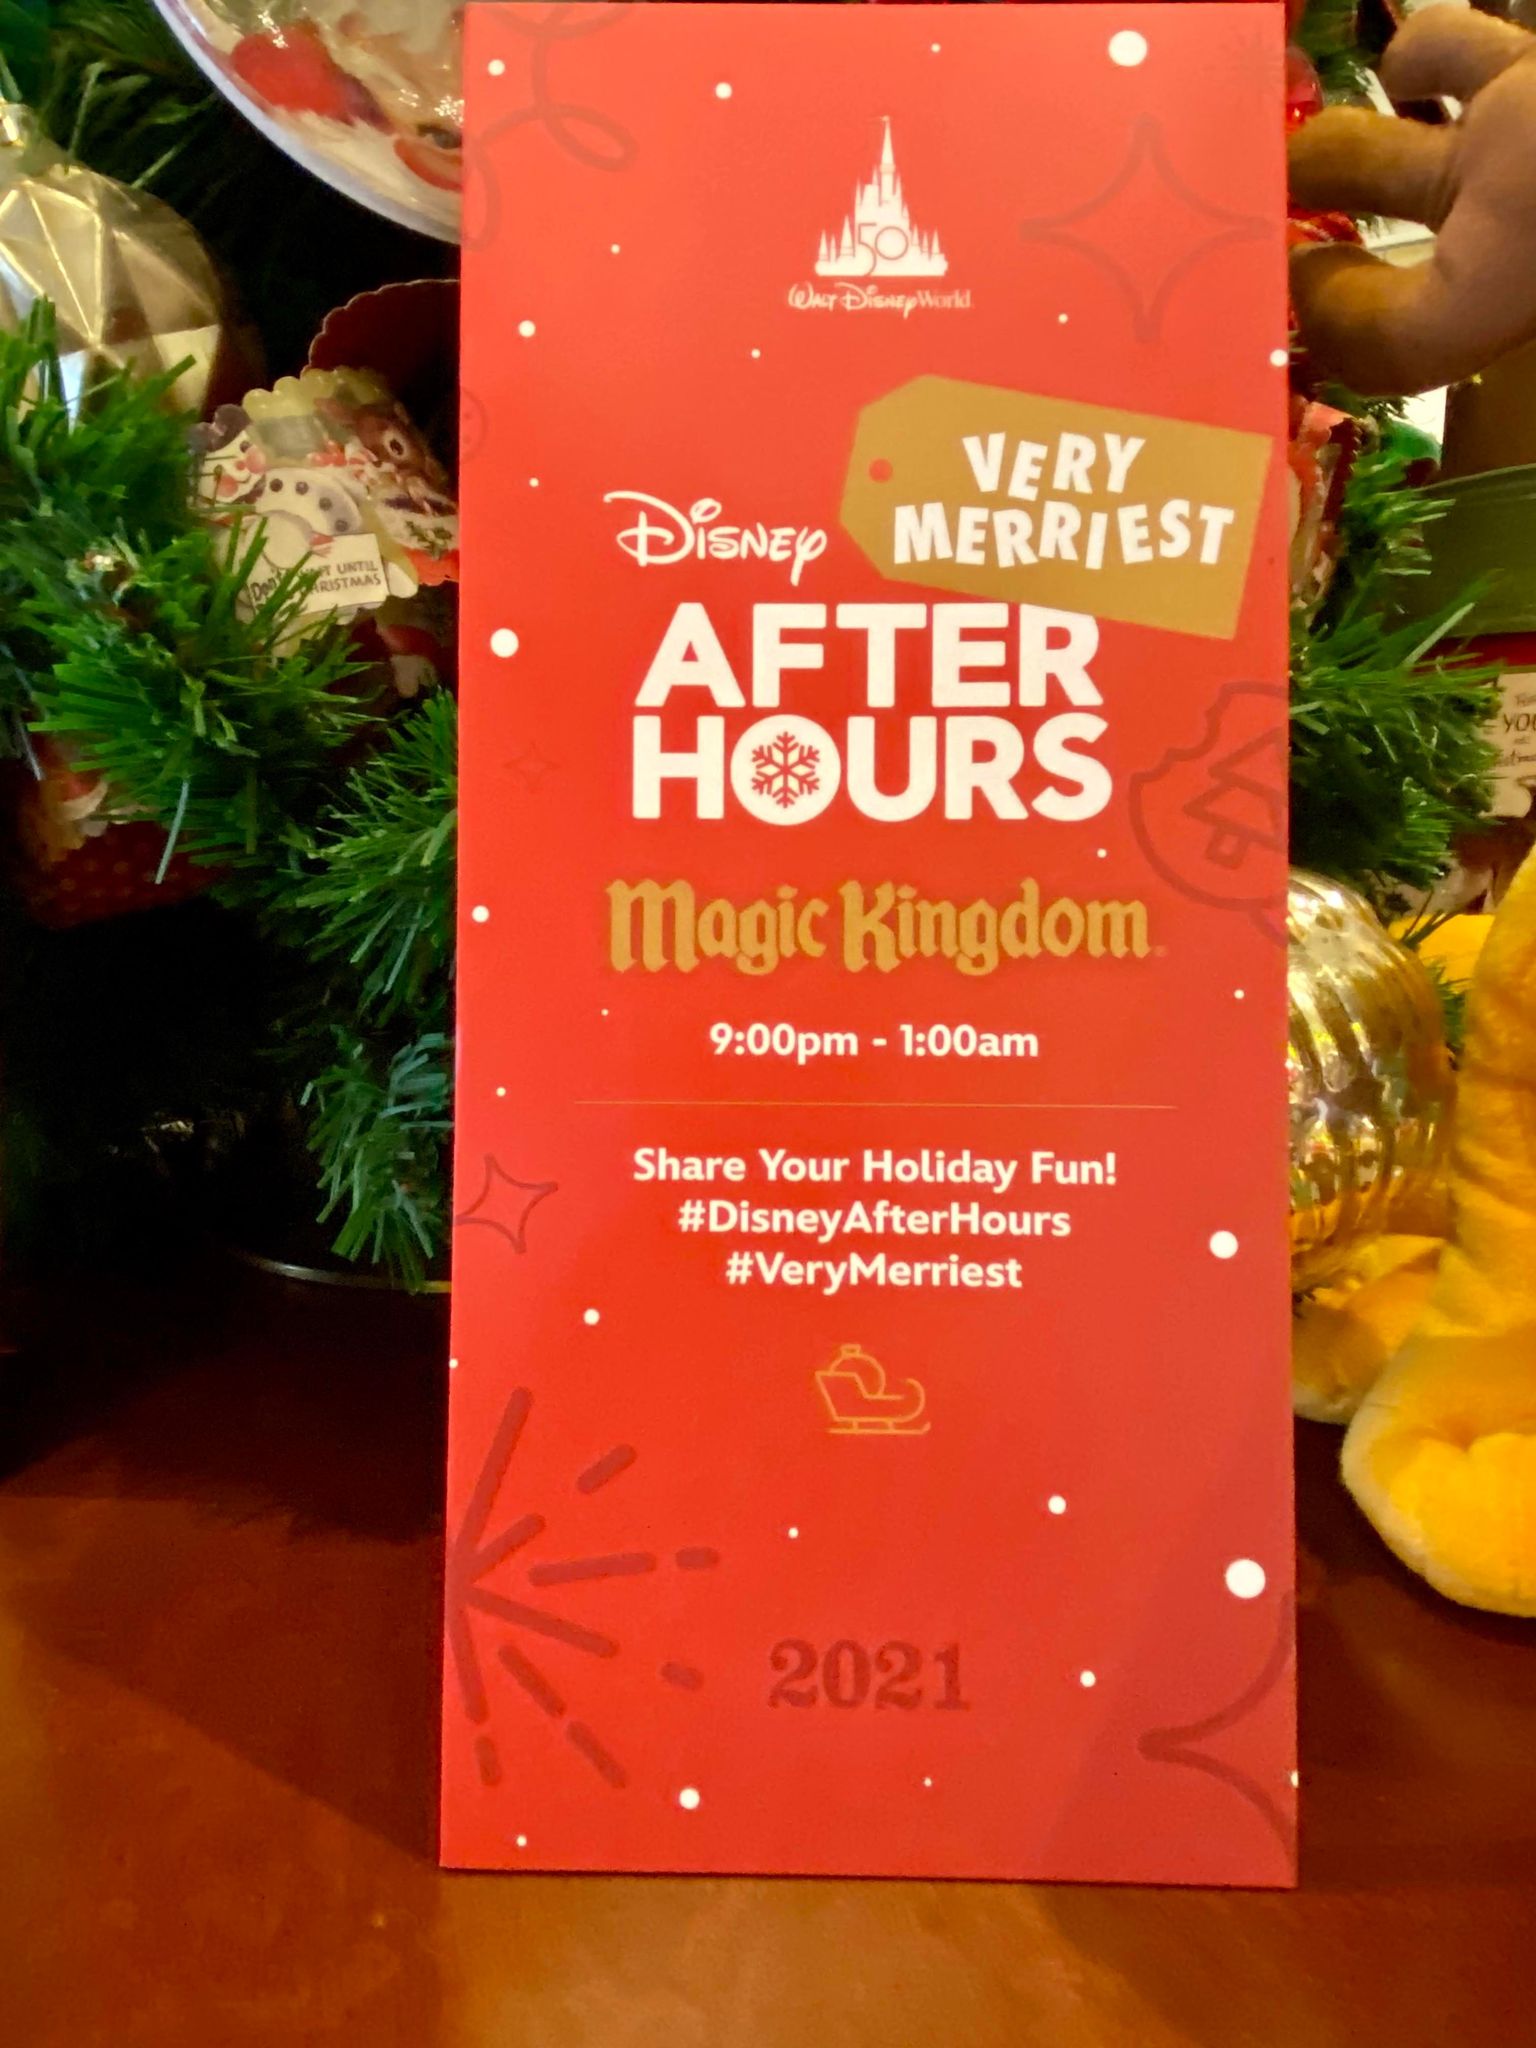 Guide Map For 21 Disney Very Merriest After Hours Mickeyblog Com